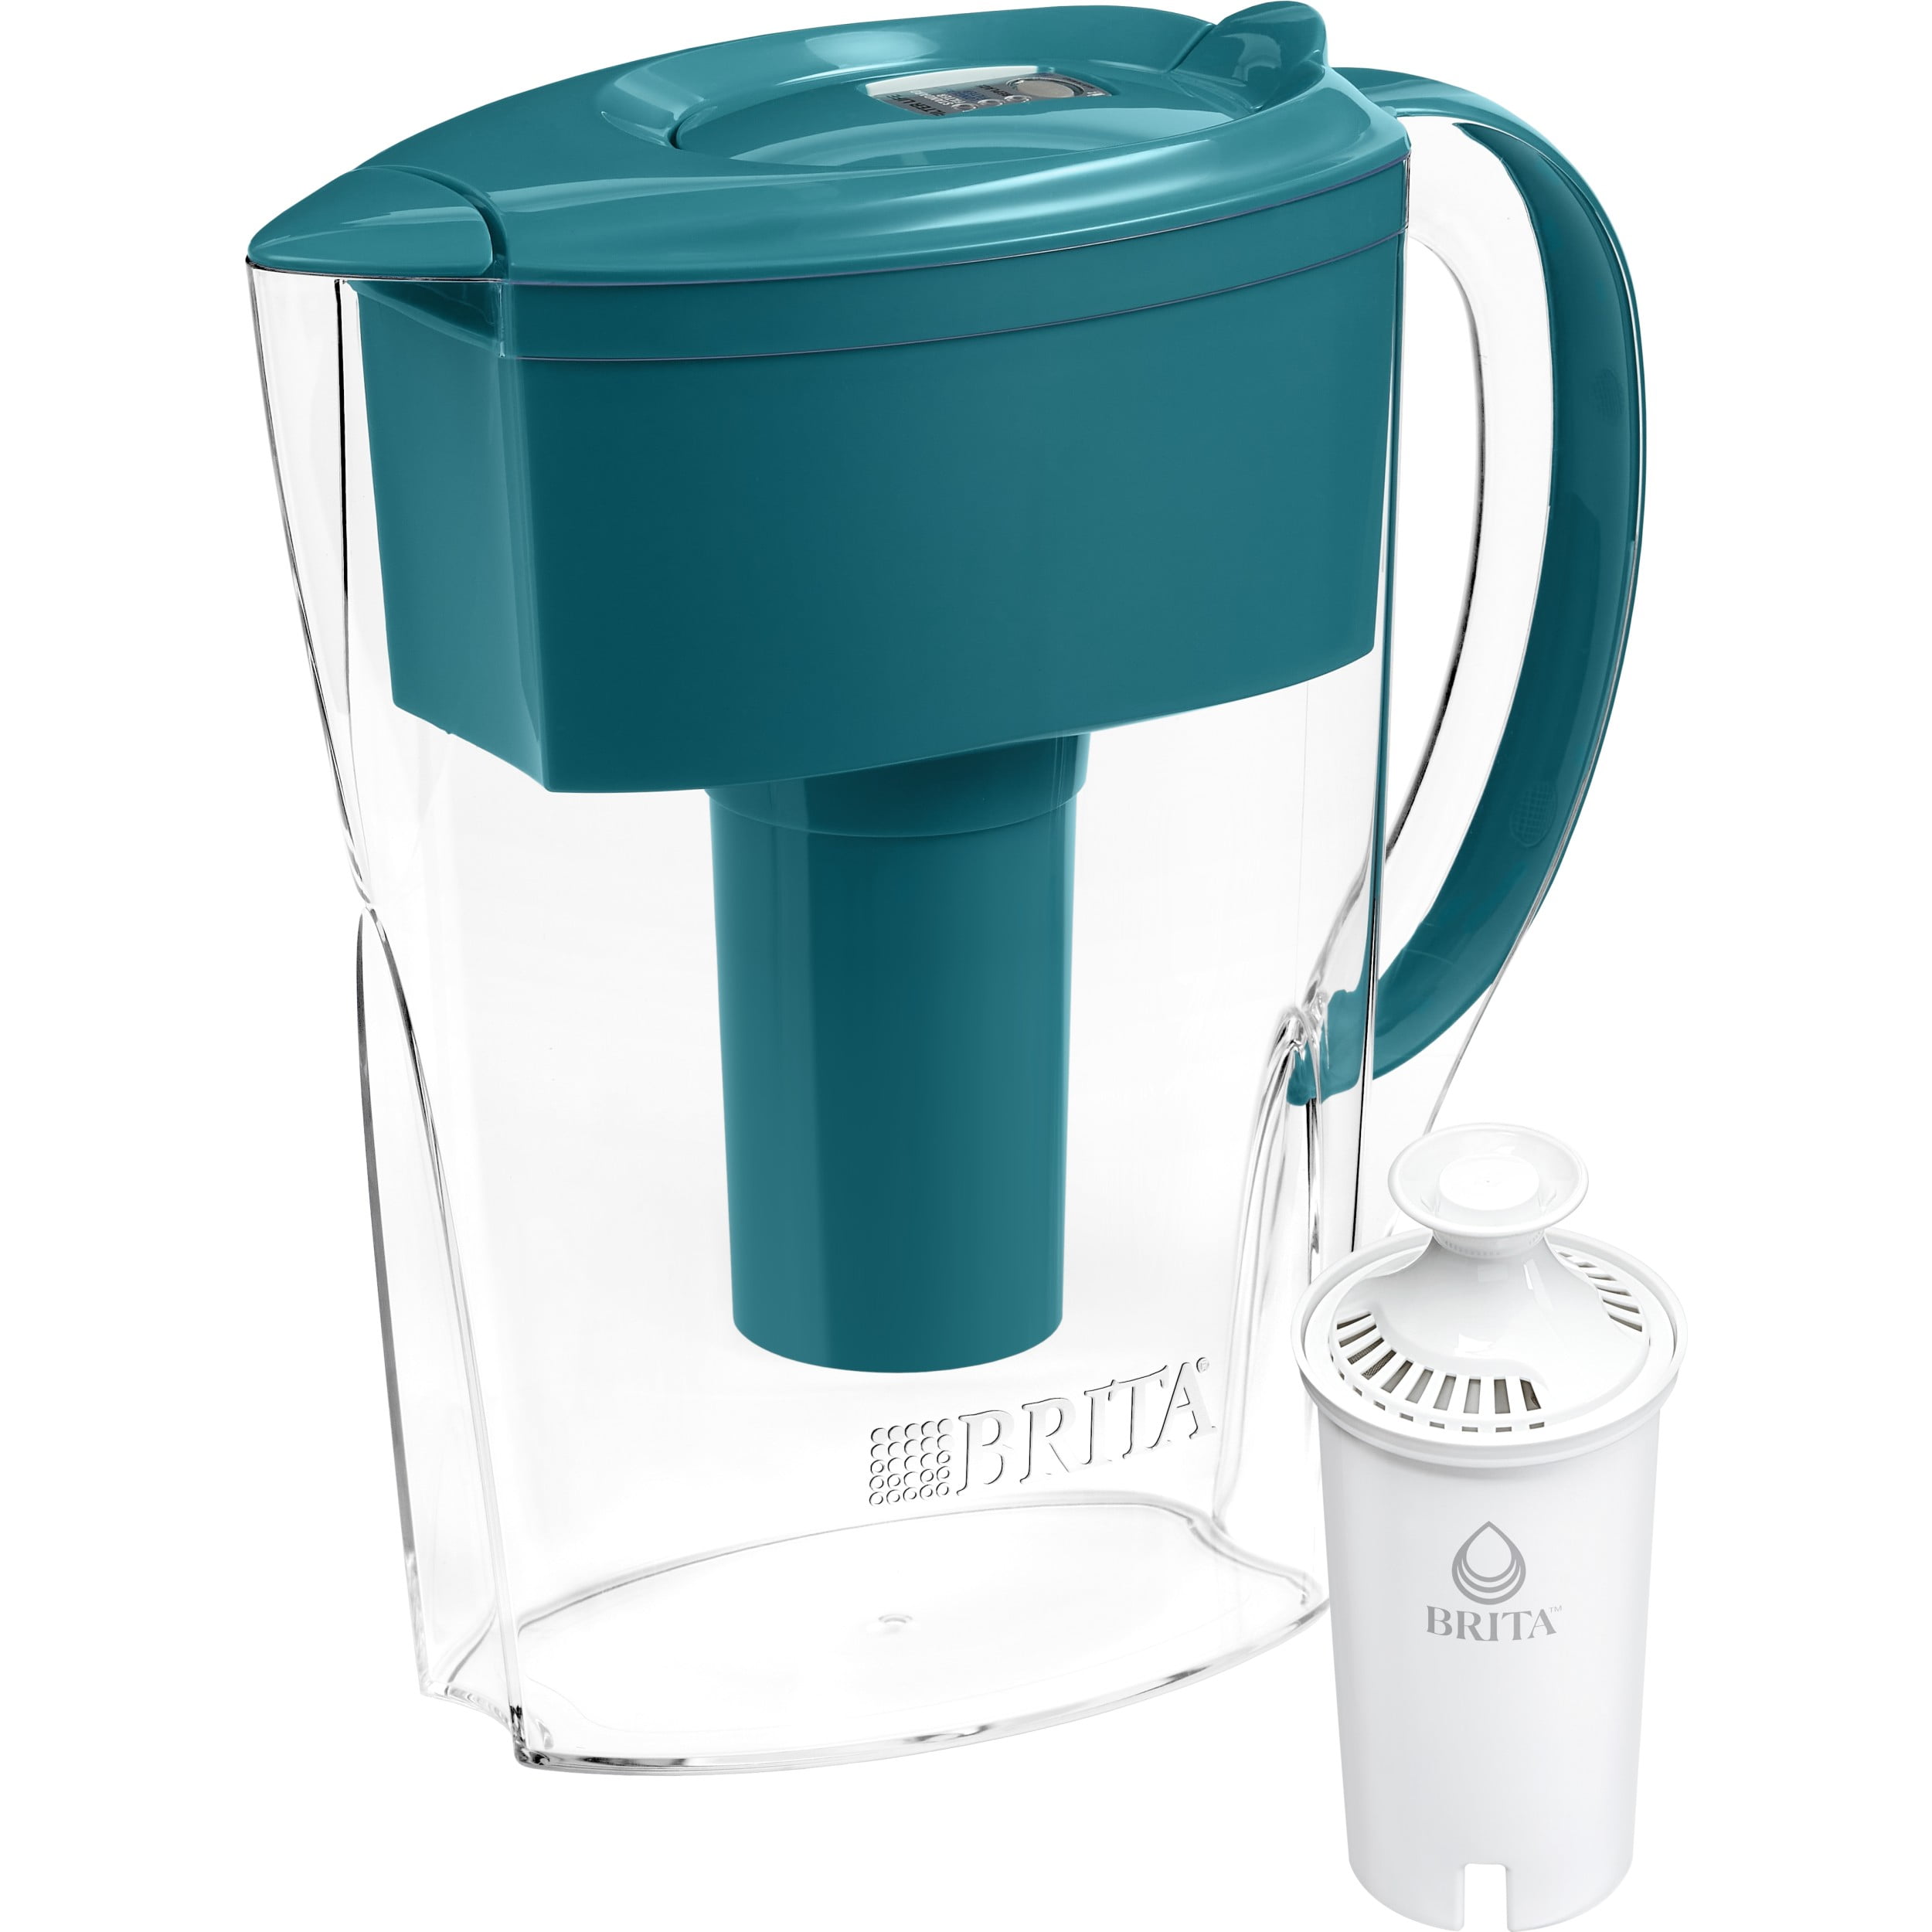 Brita Small 6 Cup Space Saver Water Filter Pitcher with 1 Standard Filter, Space Saver, Turquoise